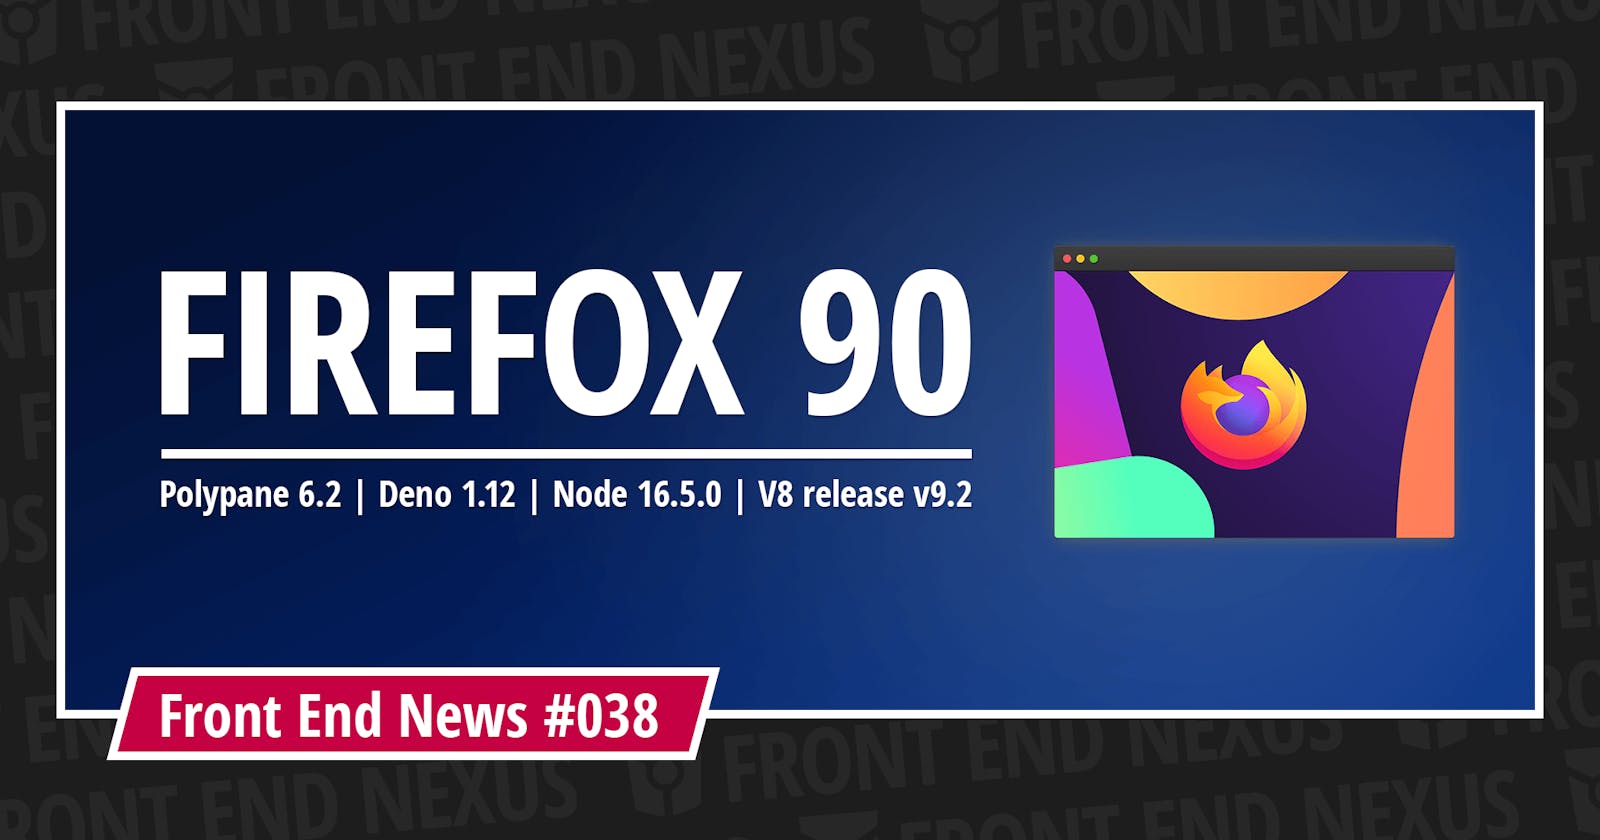 New updates and releases: Firefox 90, Polypane 6.2, Deno 1.12, Node 16.5.0, V8 release v9.2, and more | Front End News #038